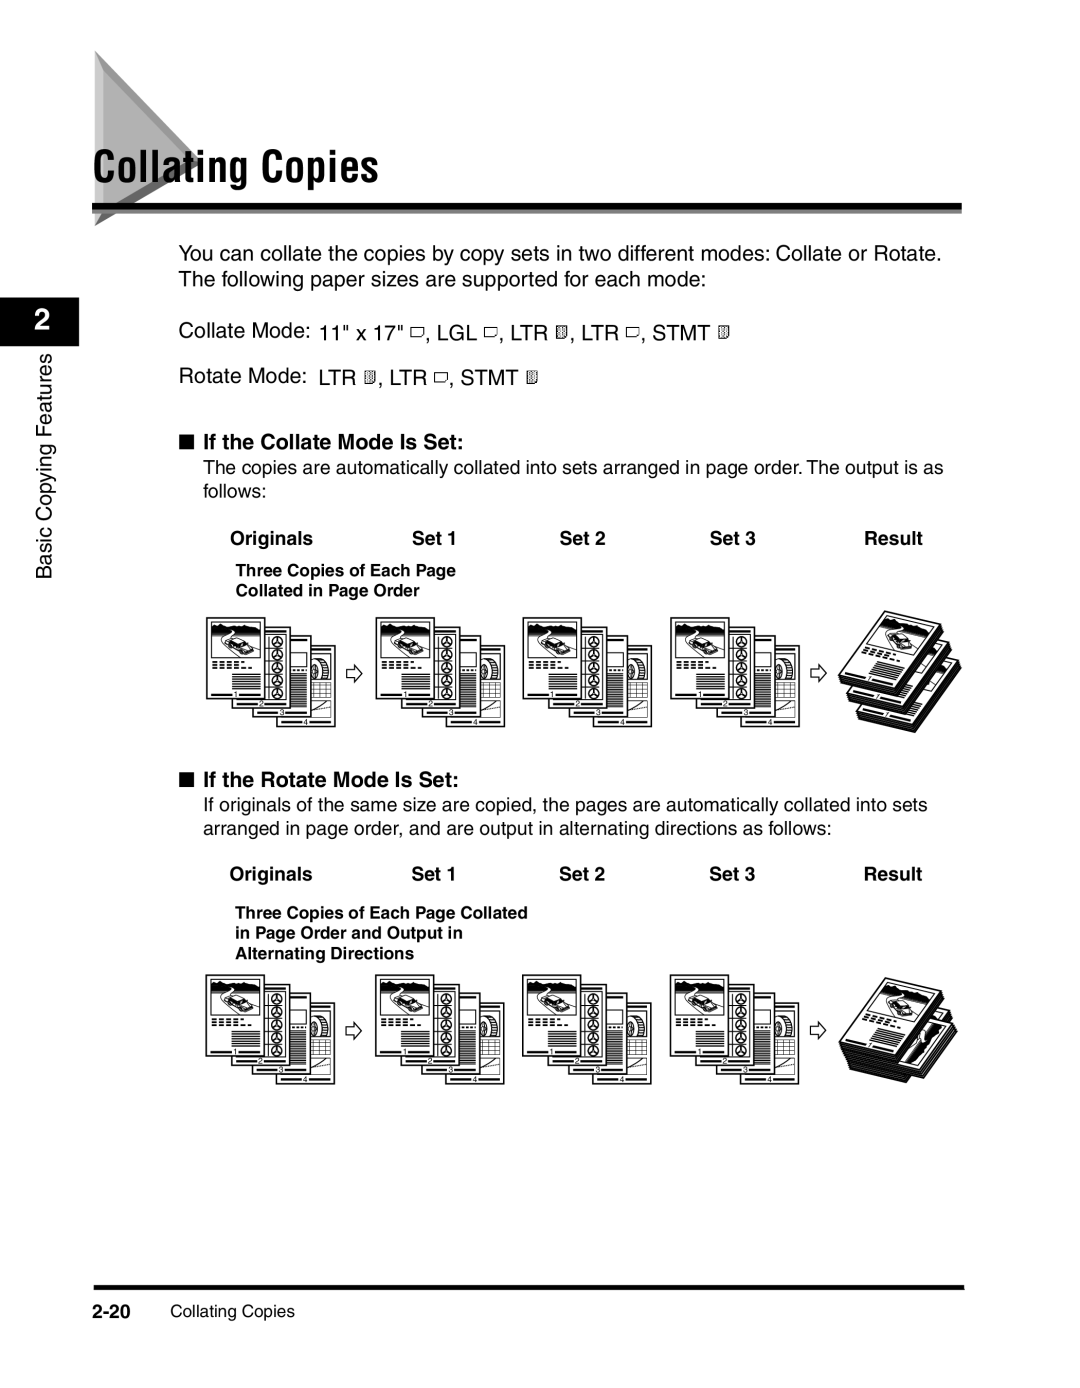 Canon 2300 manual Collating Copies, If the Collate Mode Is Set, If the Rotate Mode Is Set 